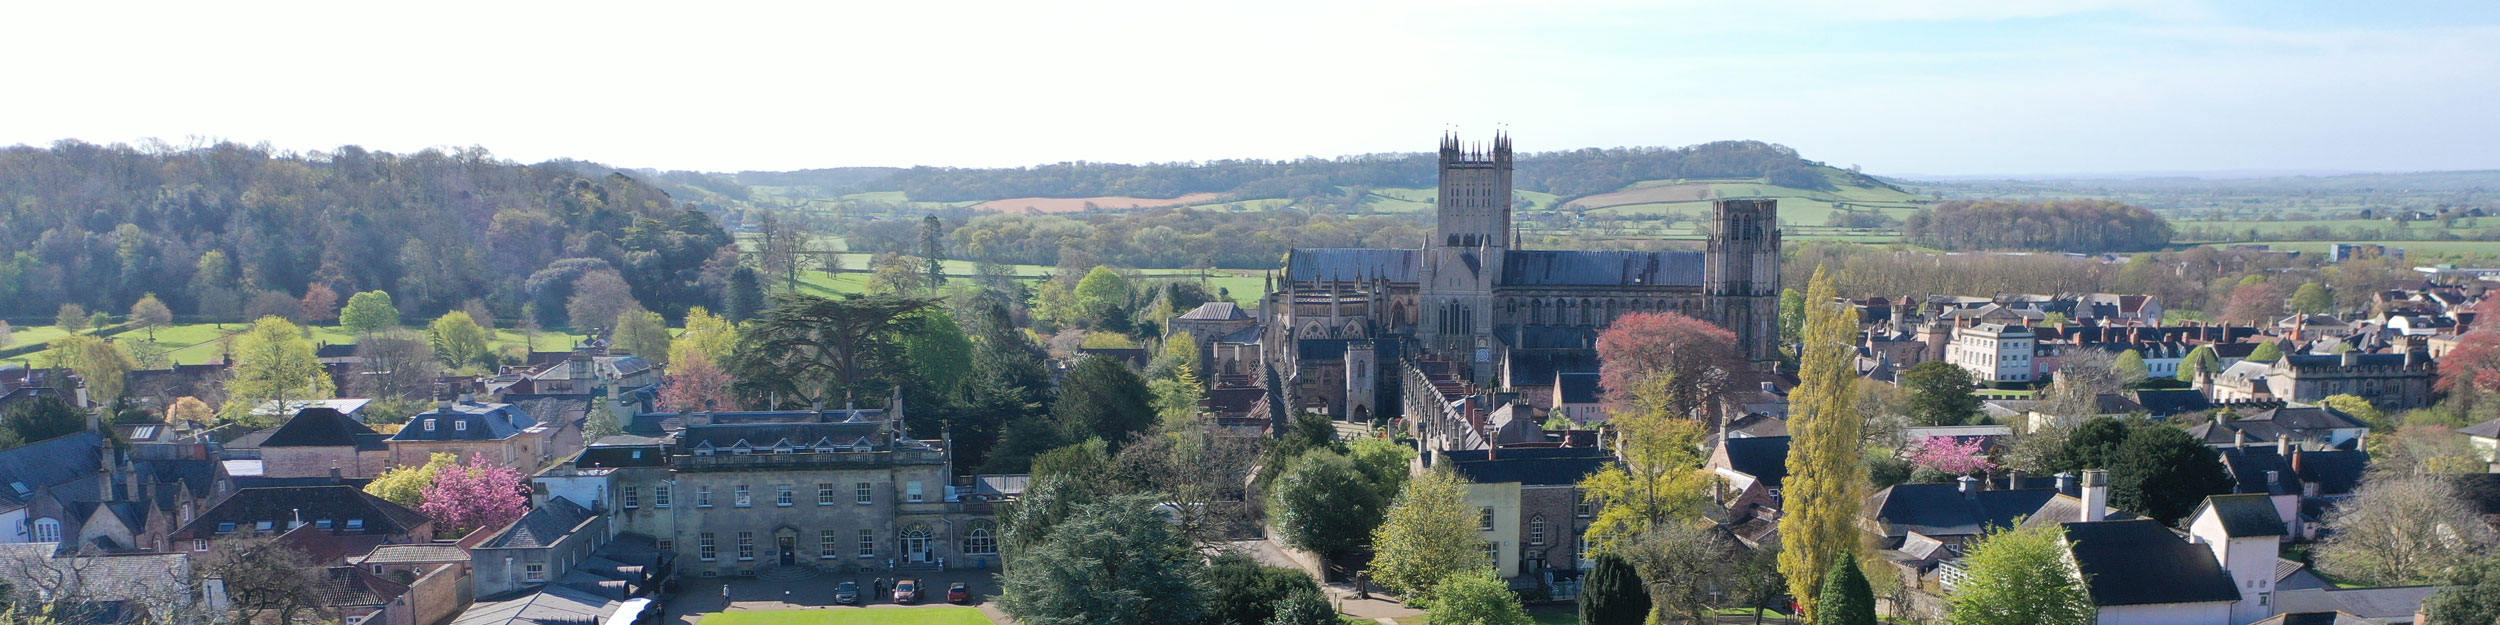 Wells Cathedral School and surrounding area